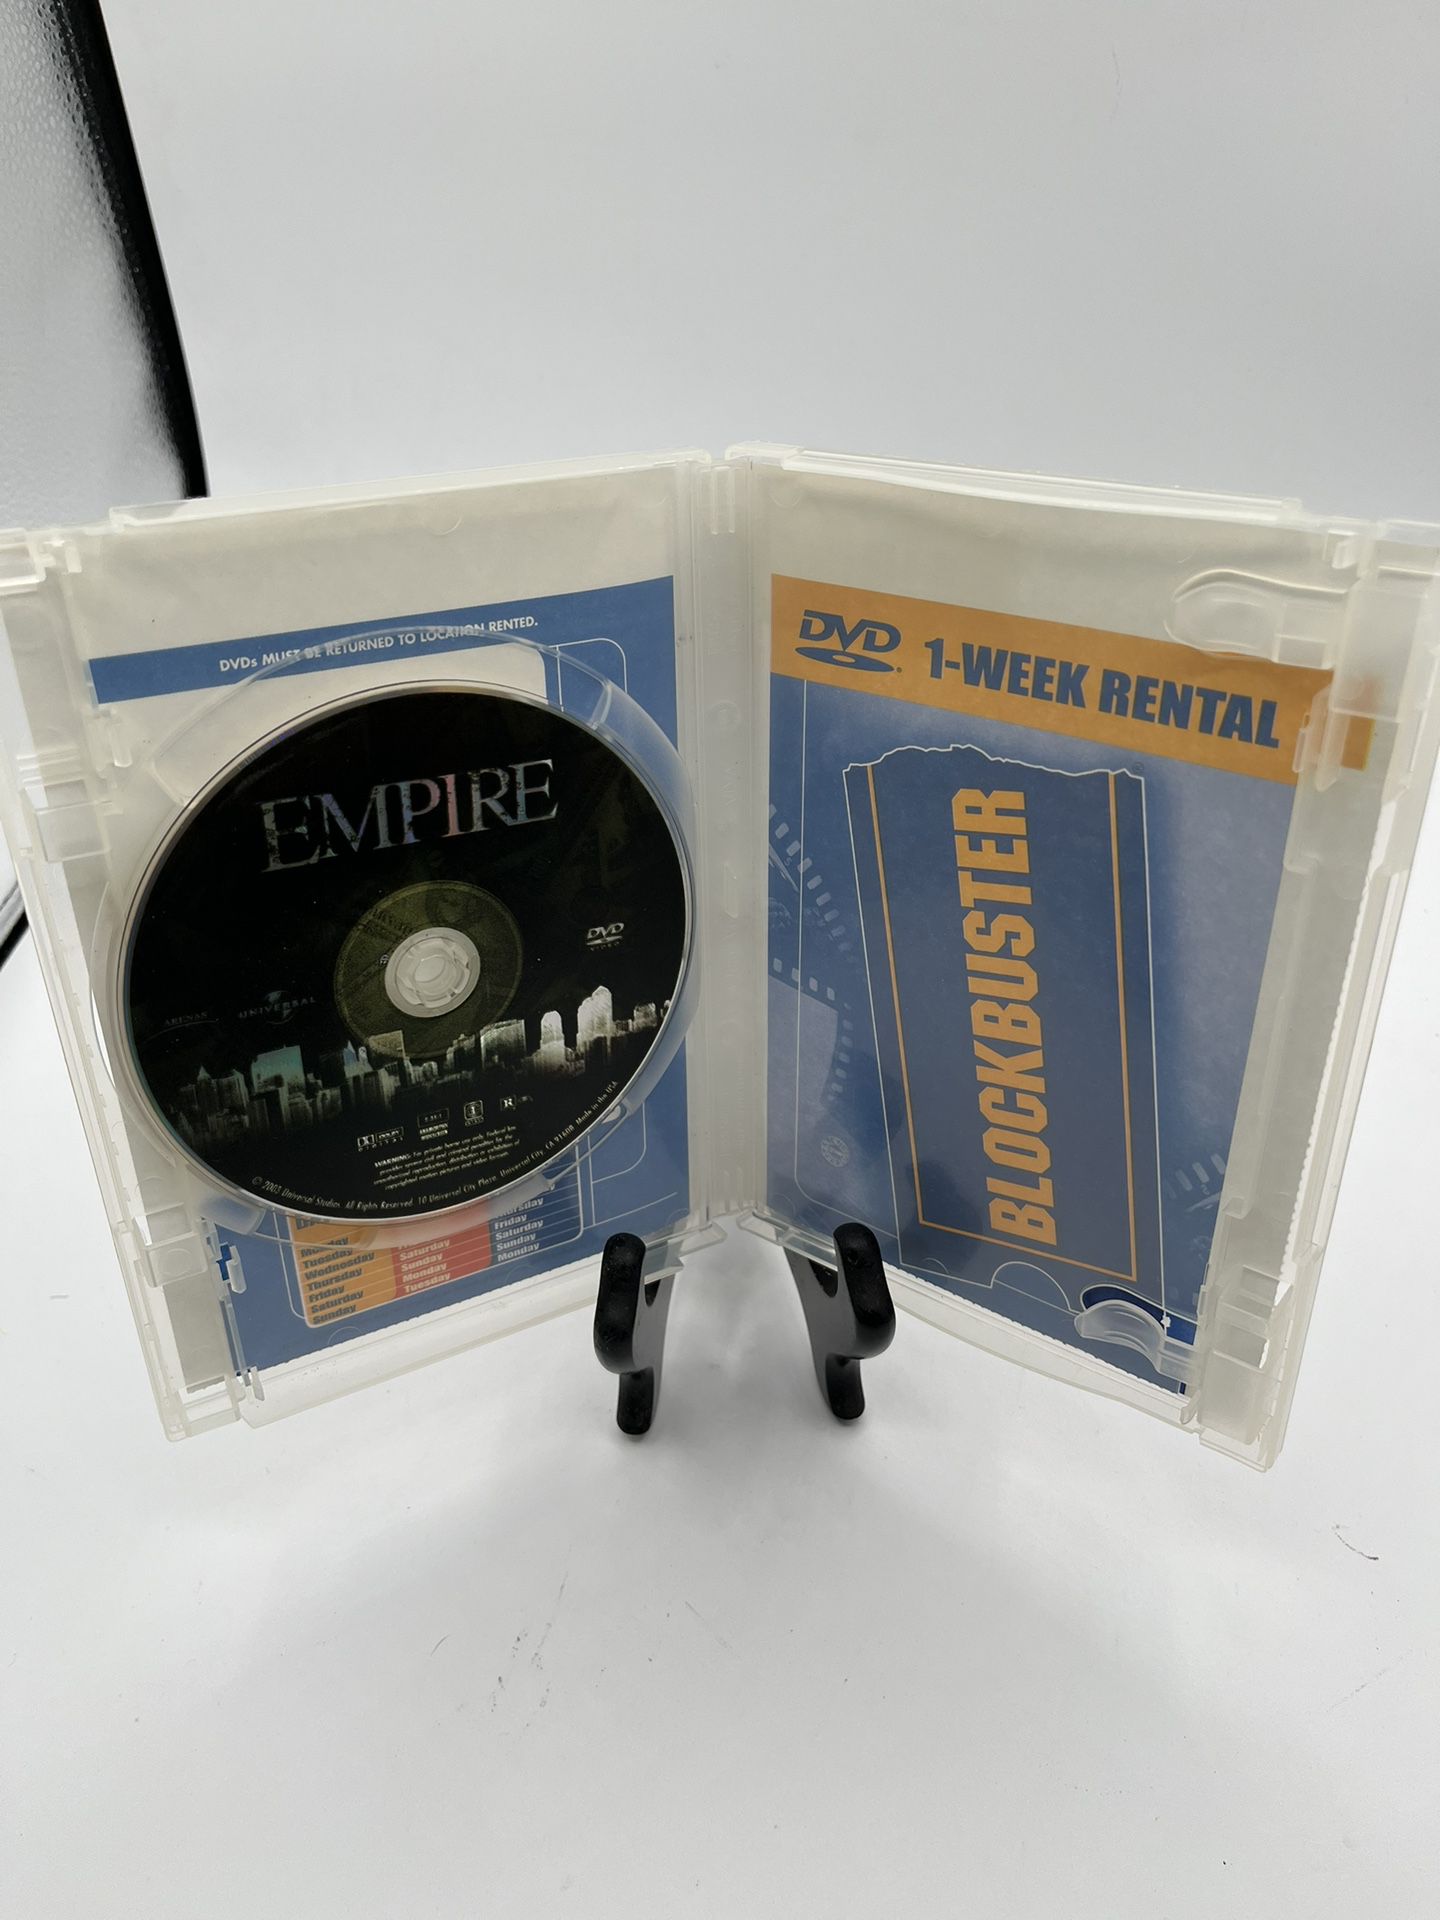 Empire DVD Universal Rated R Widescreen 